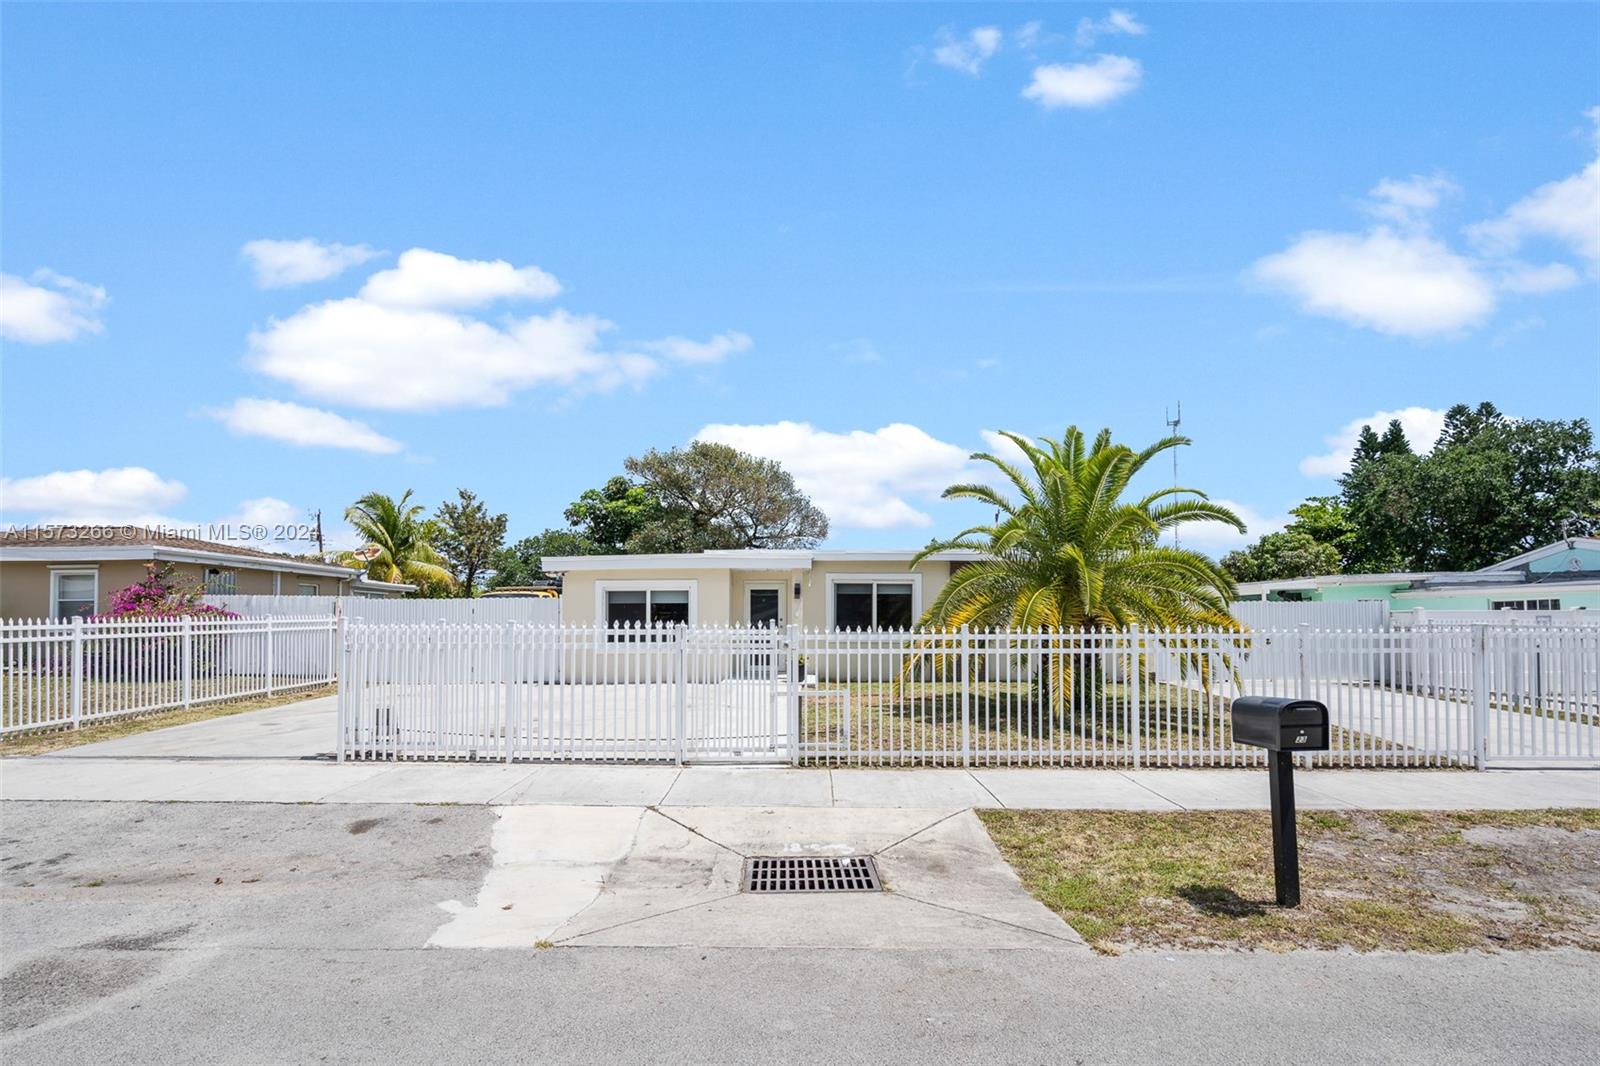 Property for Sale at 23 Miami Gardens Rd, West Park, Broward County, Florida - Bedrooms: 6 
Bathrooms: 4  - $650,000